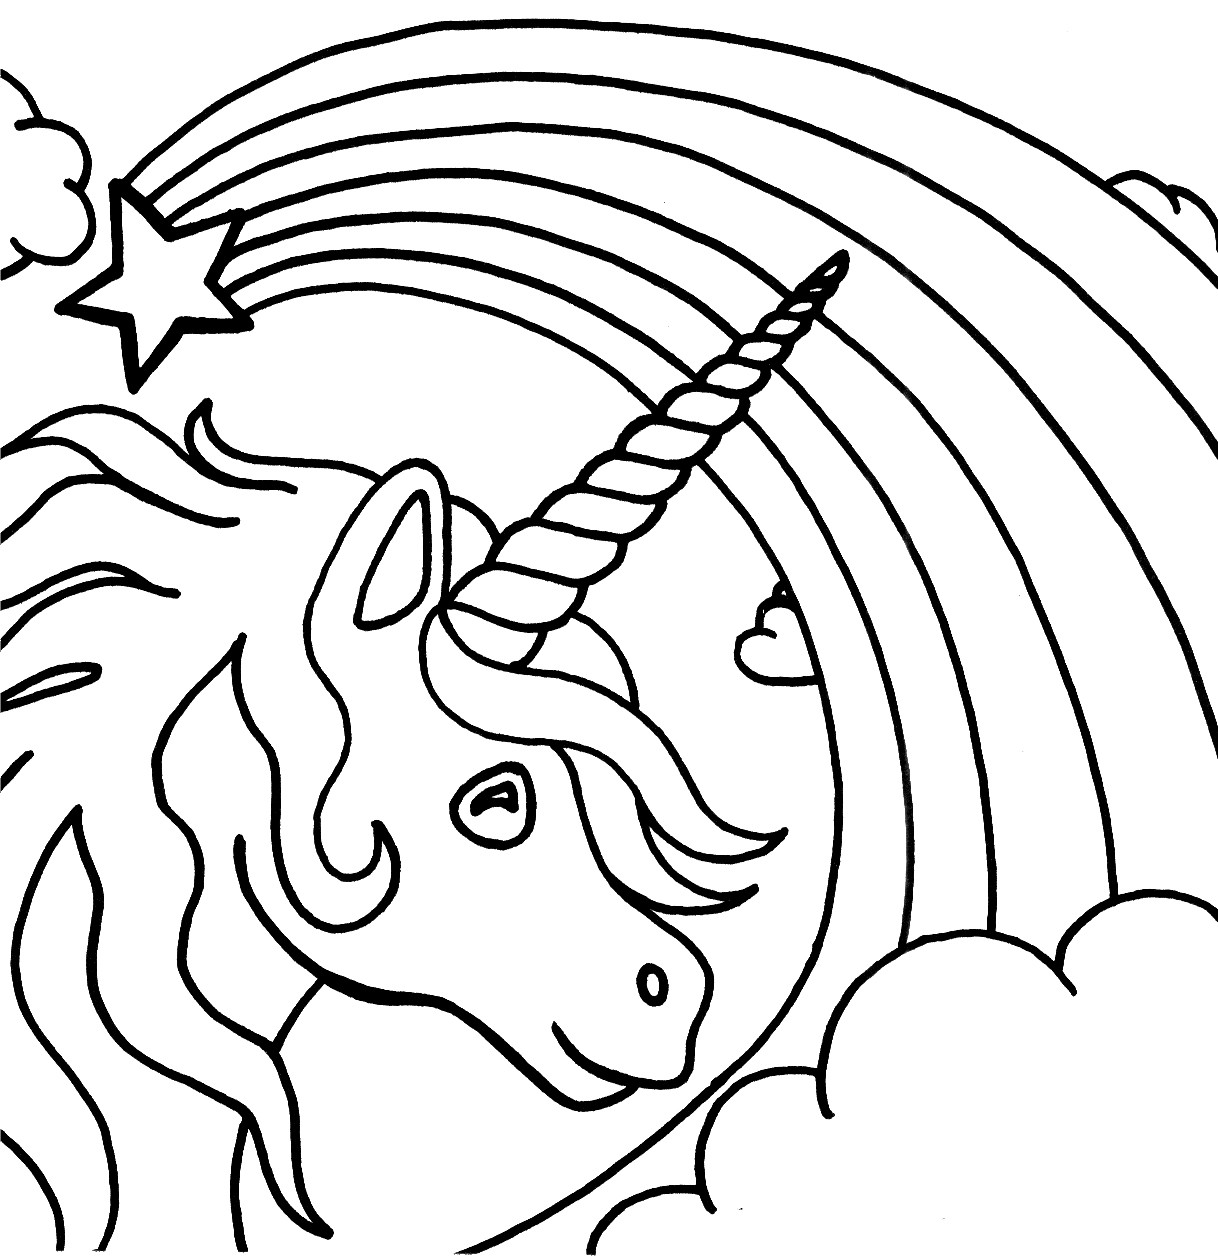 Online Coloring Pages For Toddlers
 Childrens Colouring In Printable Printable 360